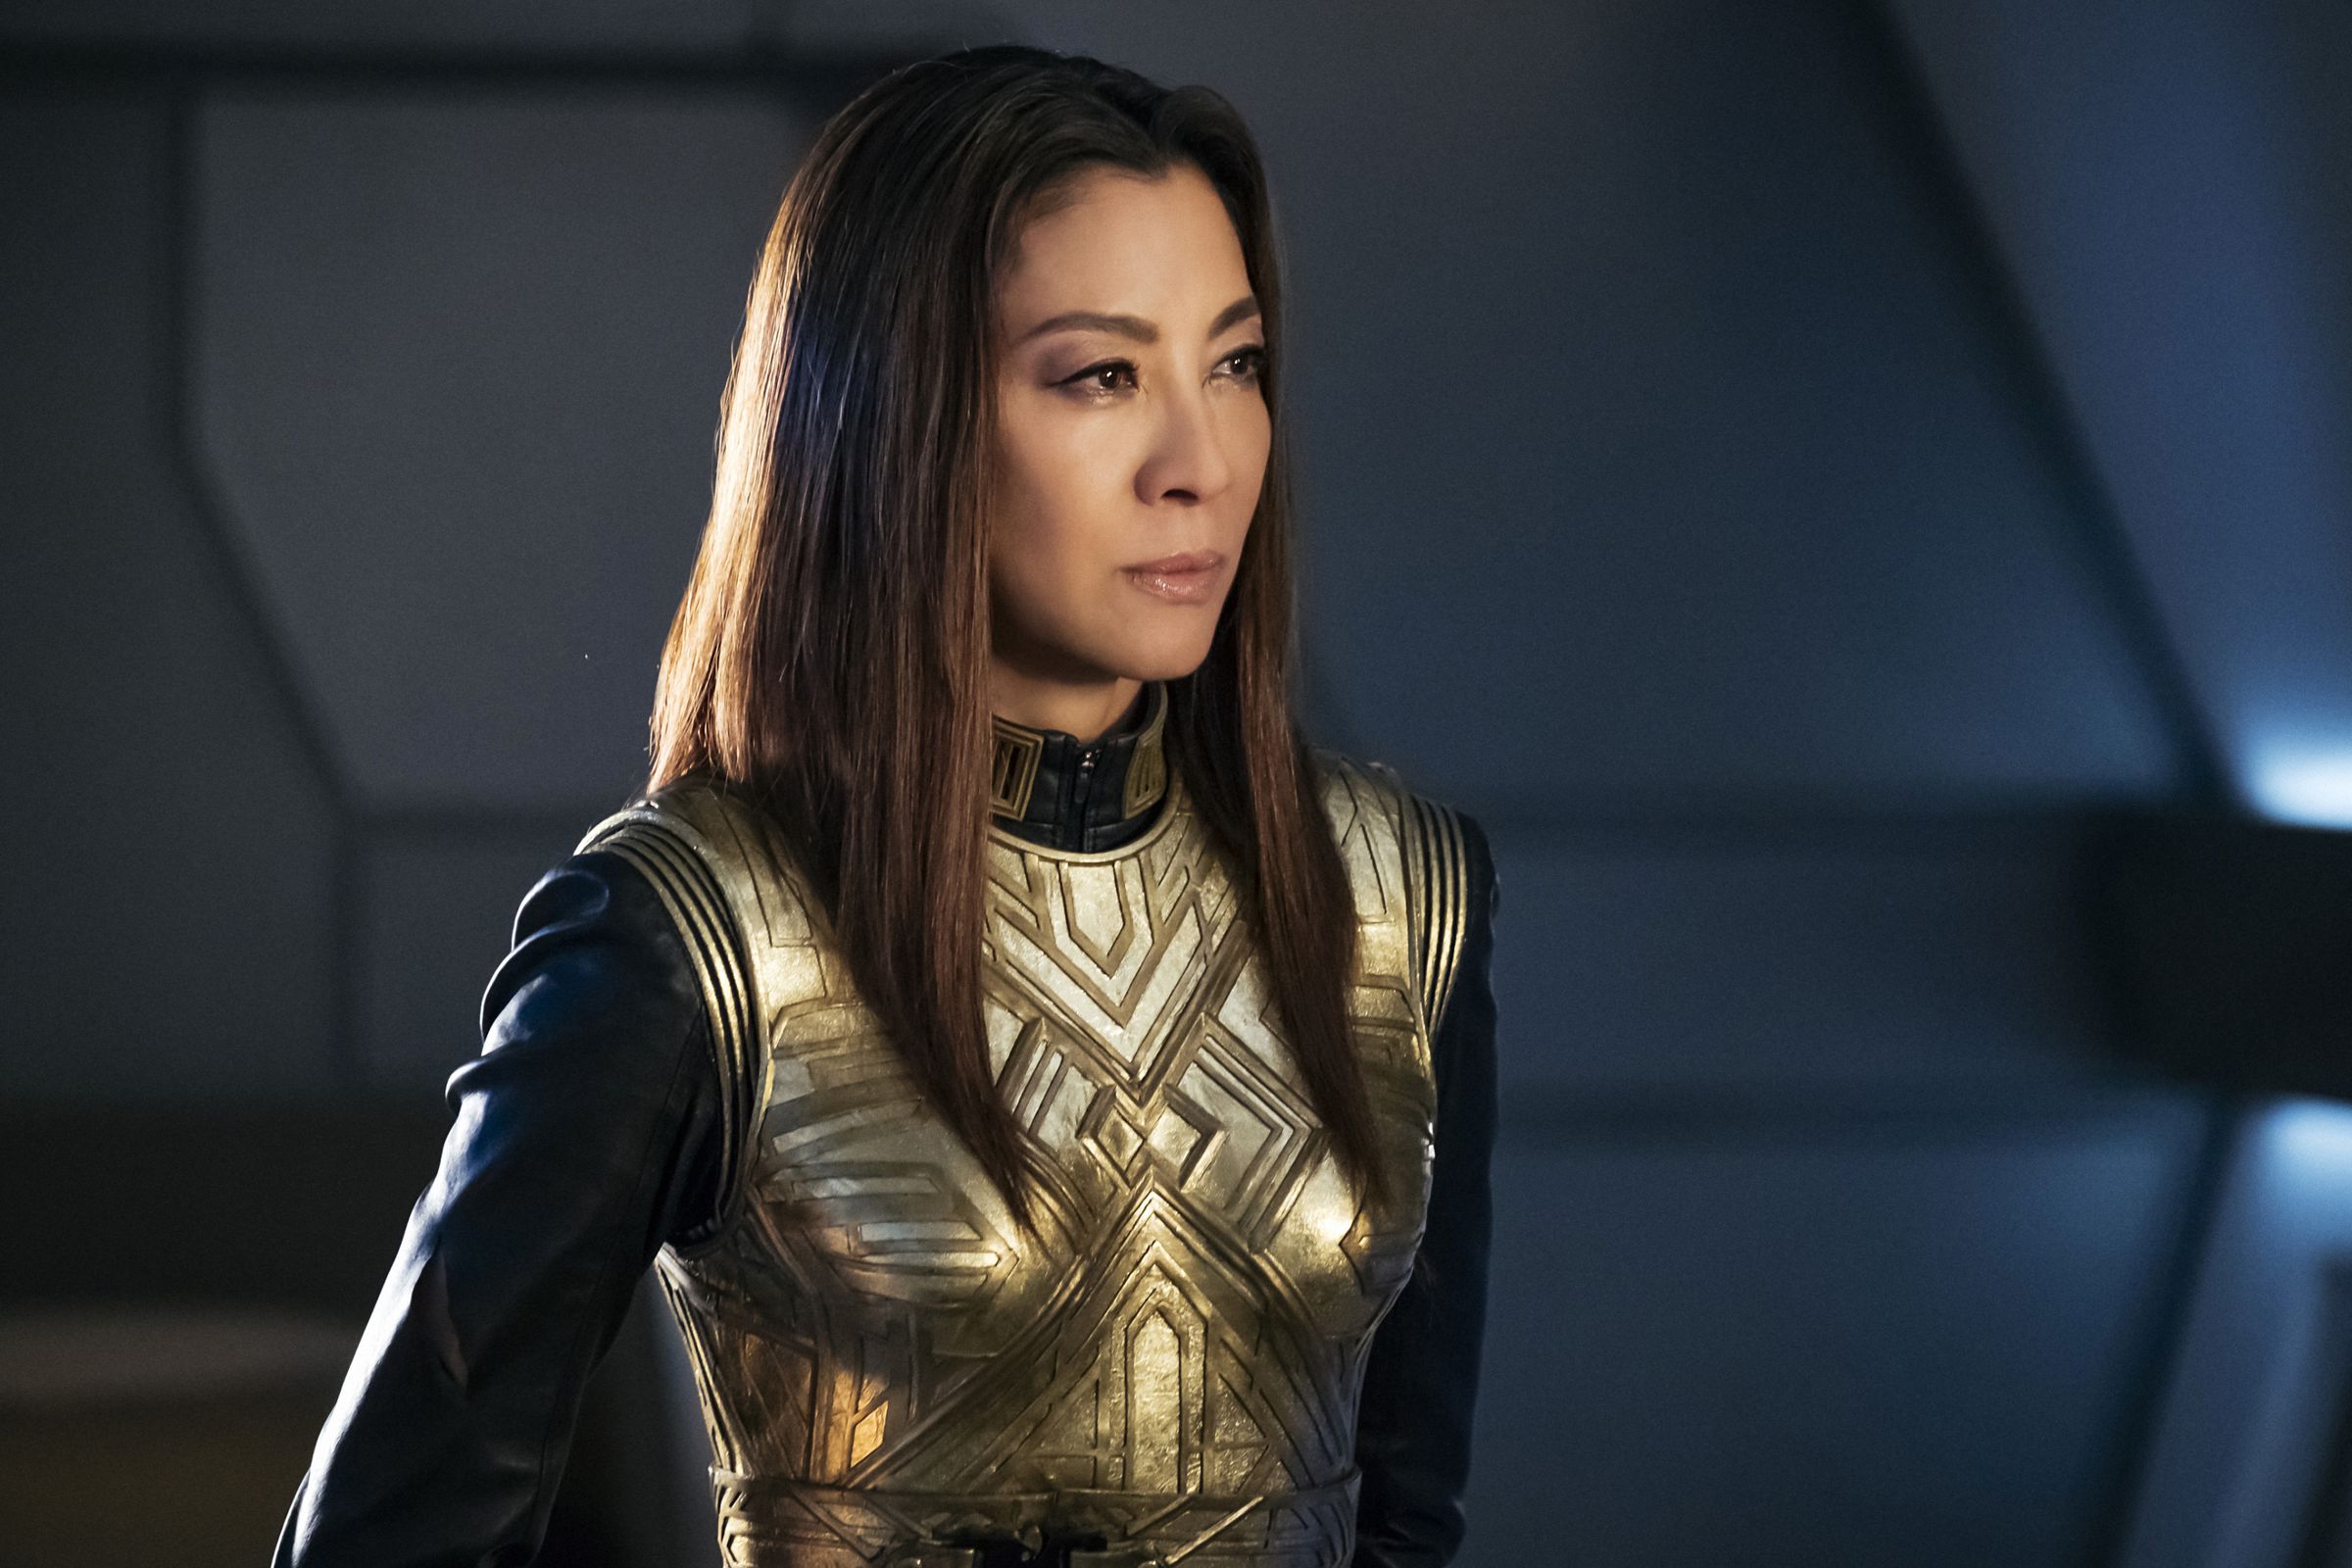 Michelle Yeoh stands straight, looking annoyed, and wearing a gold chest plate.